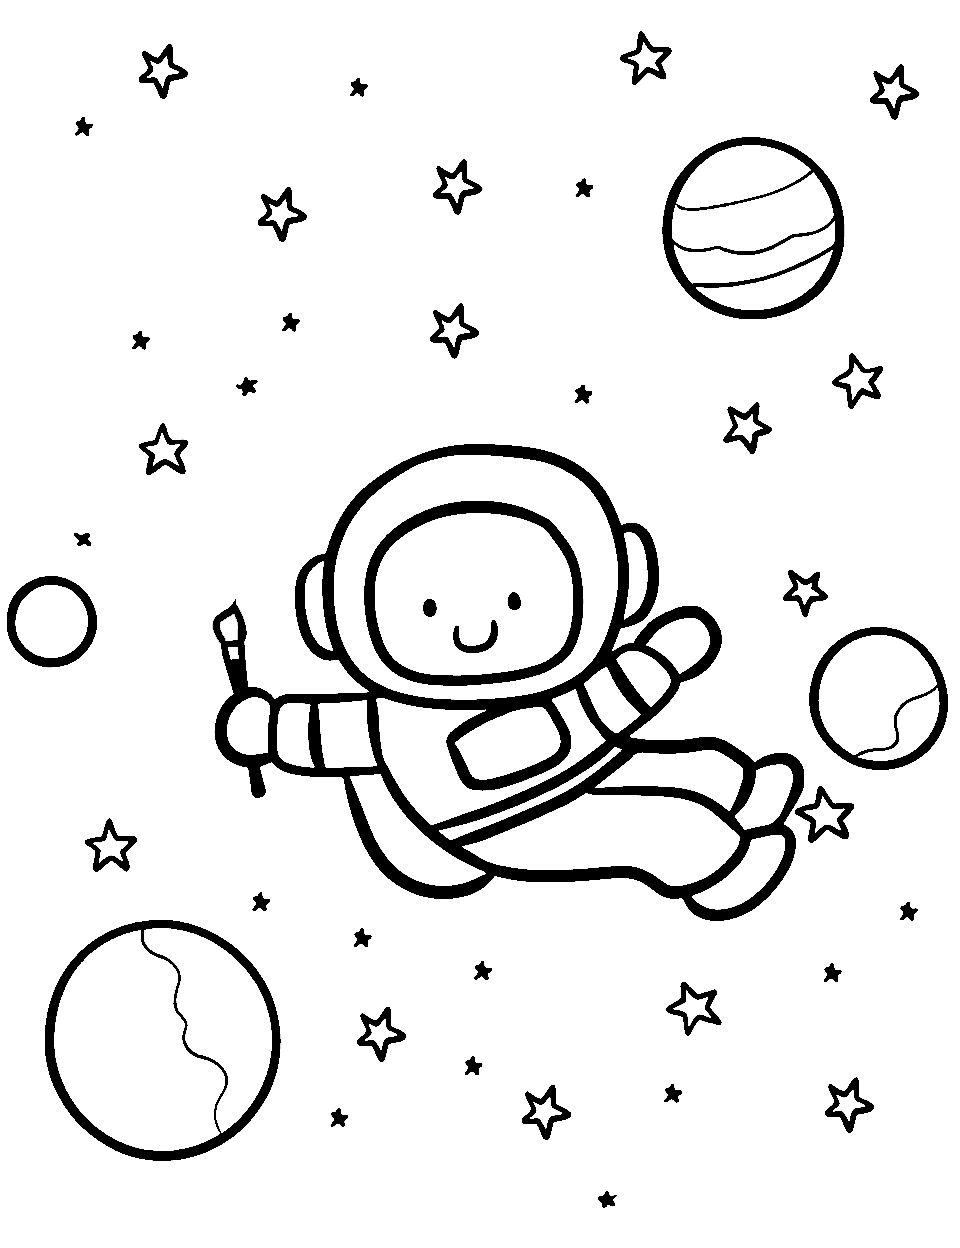 Artistic Astronaut Coloring Page - An astronaut with a paintbrush ready to paint on the stars and planets in space.